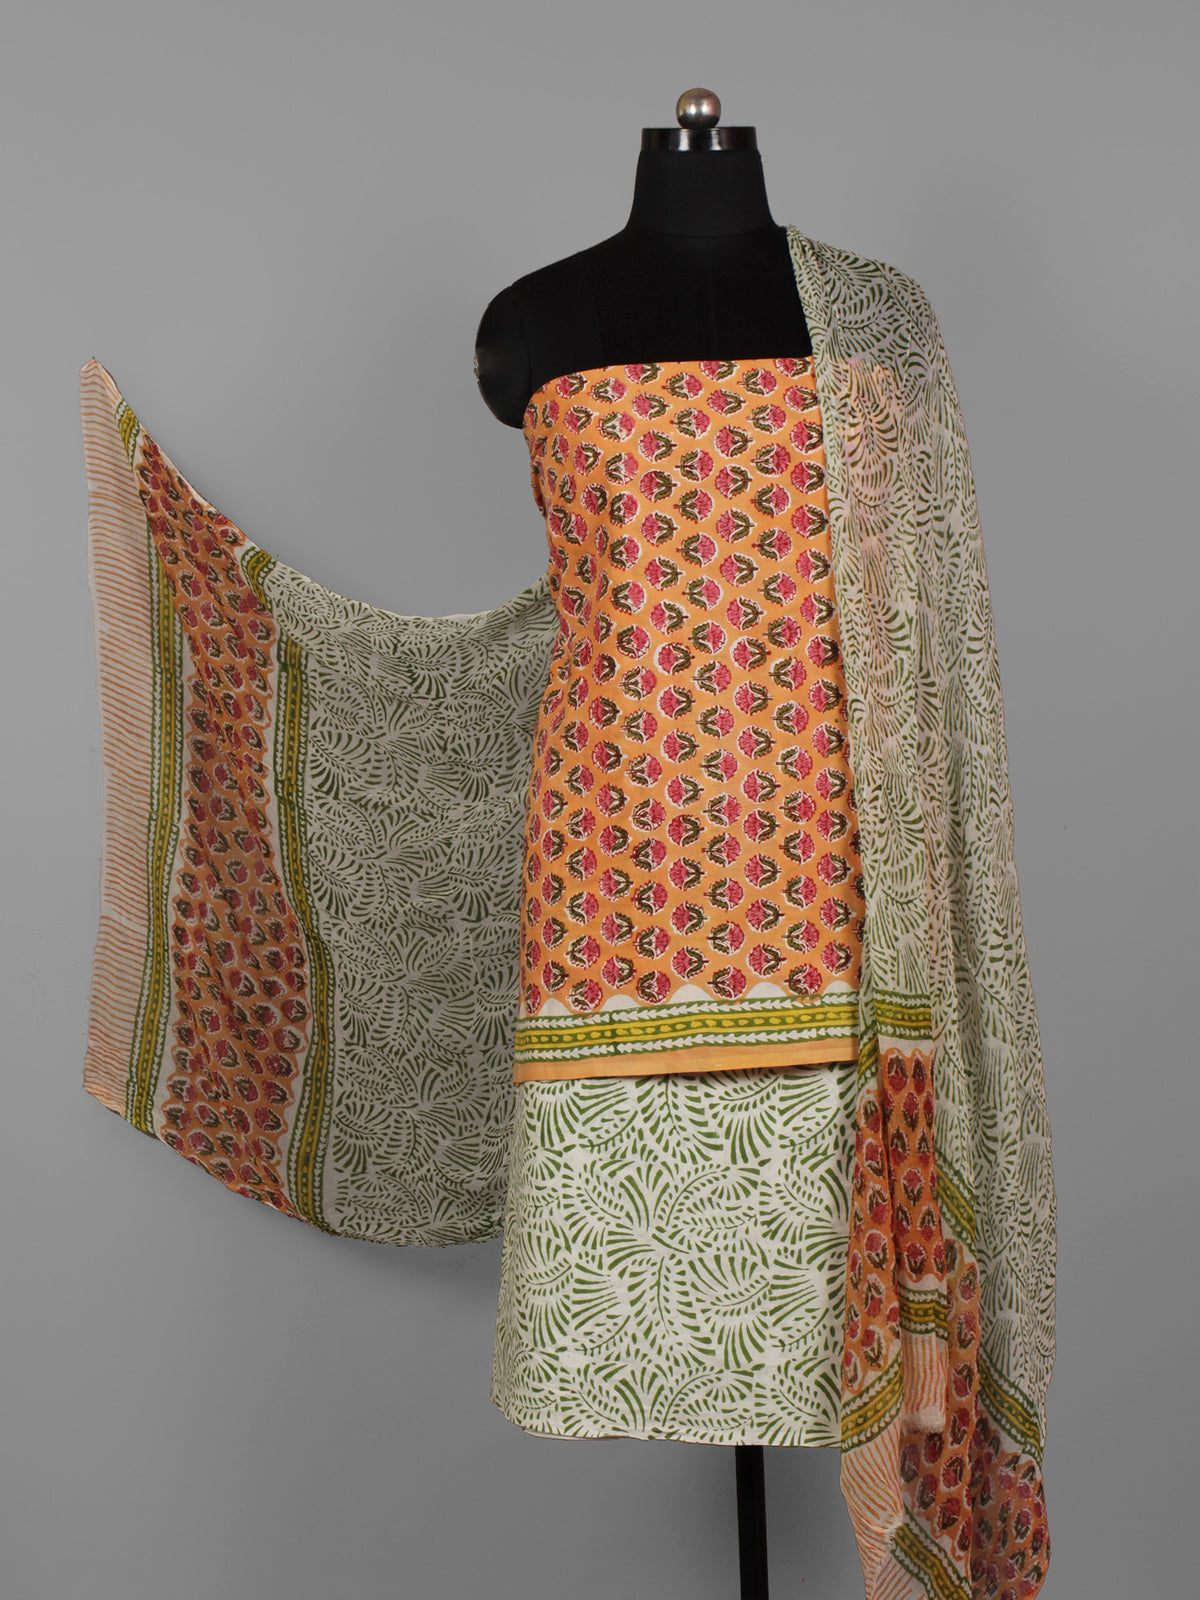 Peach Ivory Olive Green Hand Block Printed Cotton Suit-Salwar Fabric With Chiffon Dupatta (Set of 3) - S16281279